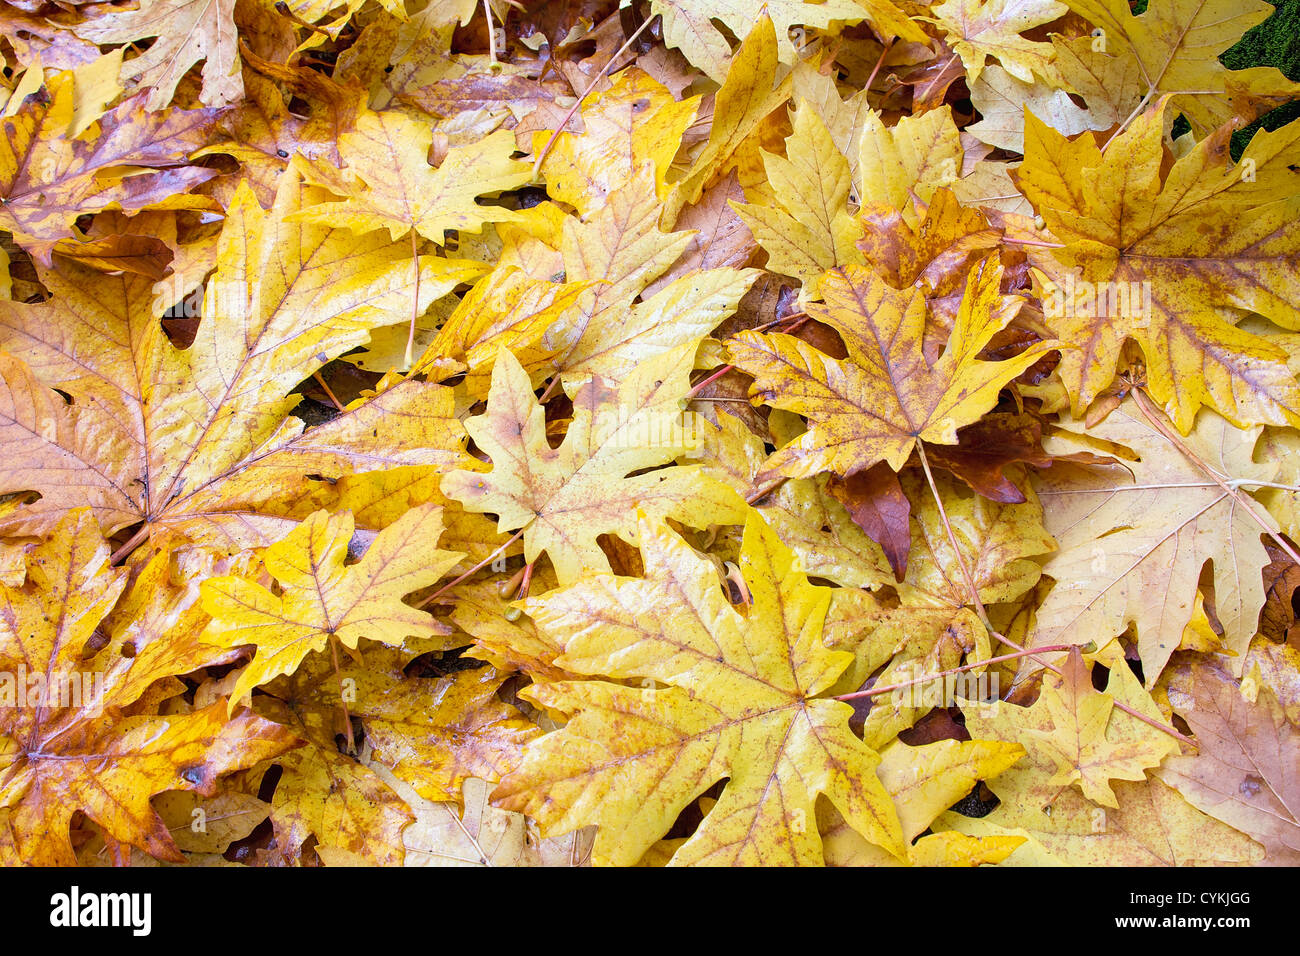 Fallen Wet Giant Maple Tree Leaves in Autumn Color Background Stock Photo